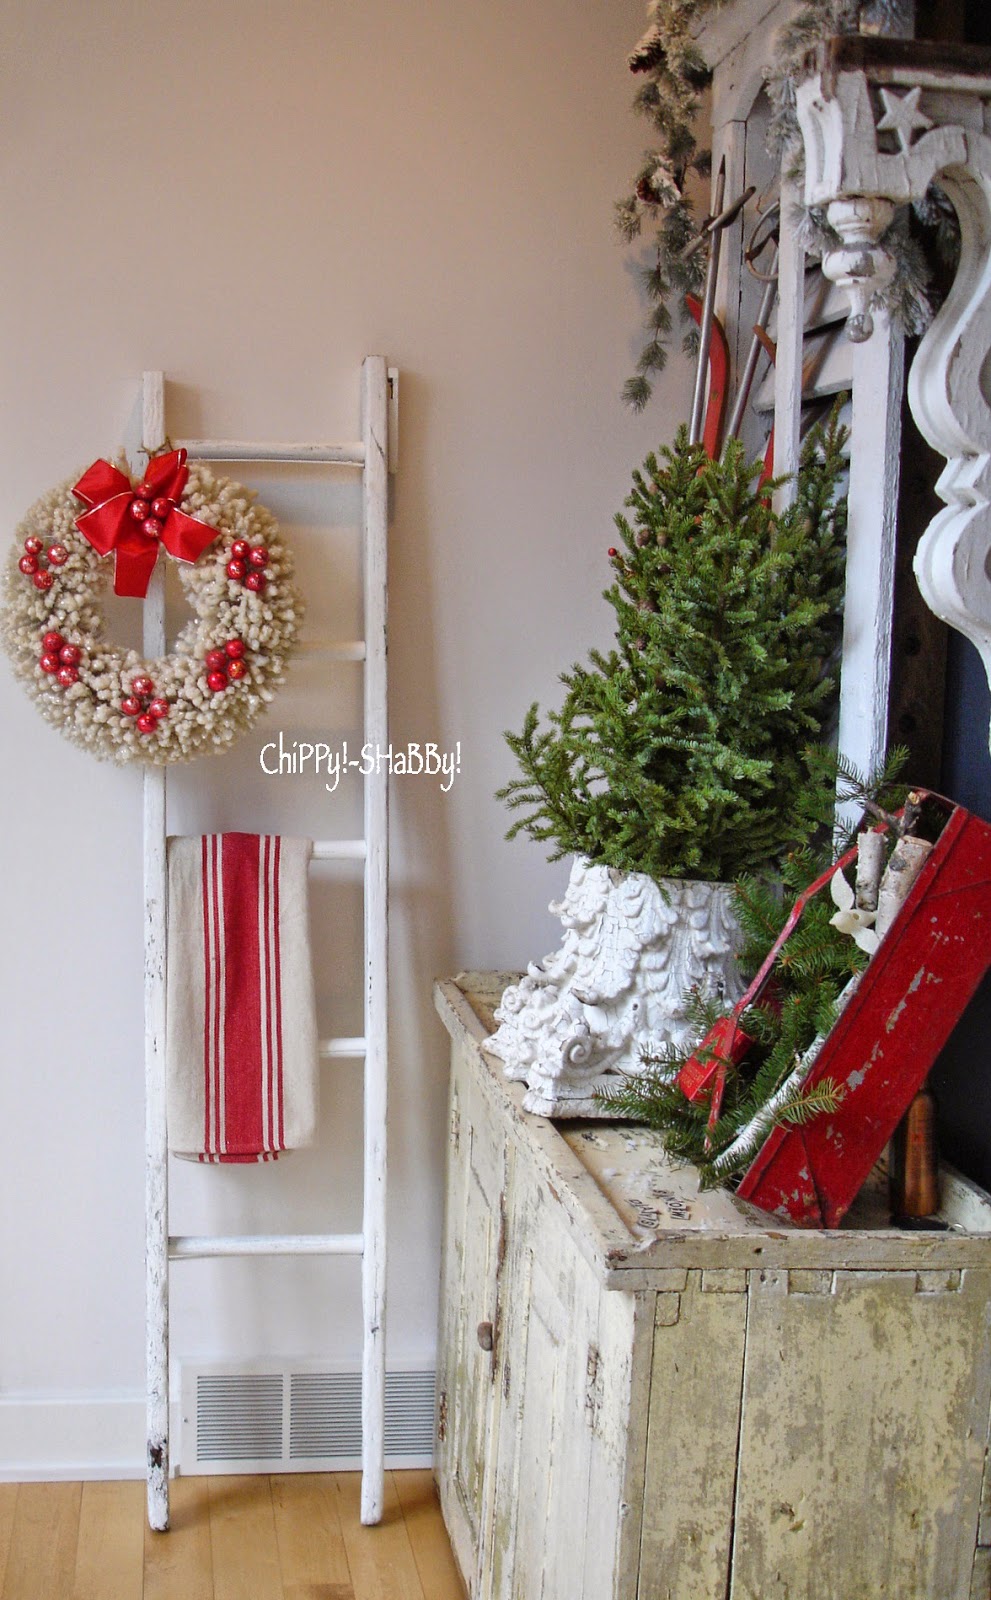 ChiPPy! - SHaBBy!: SHaBBy-Painted ViNtaGe Ladder ~ Just PerFeCt for my ...